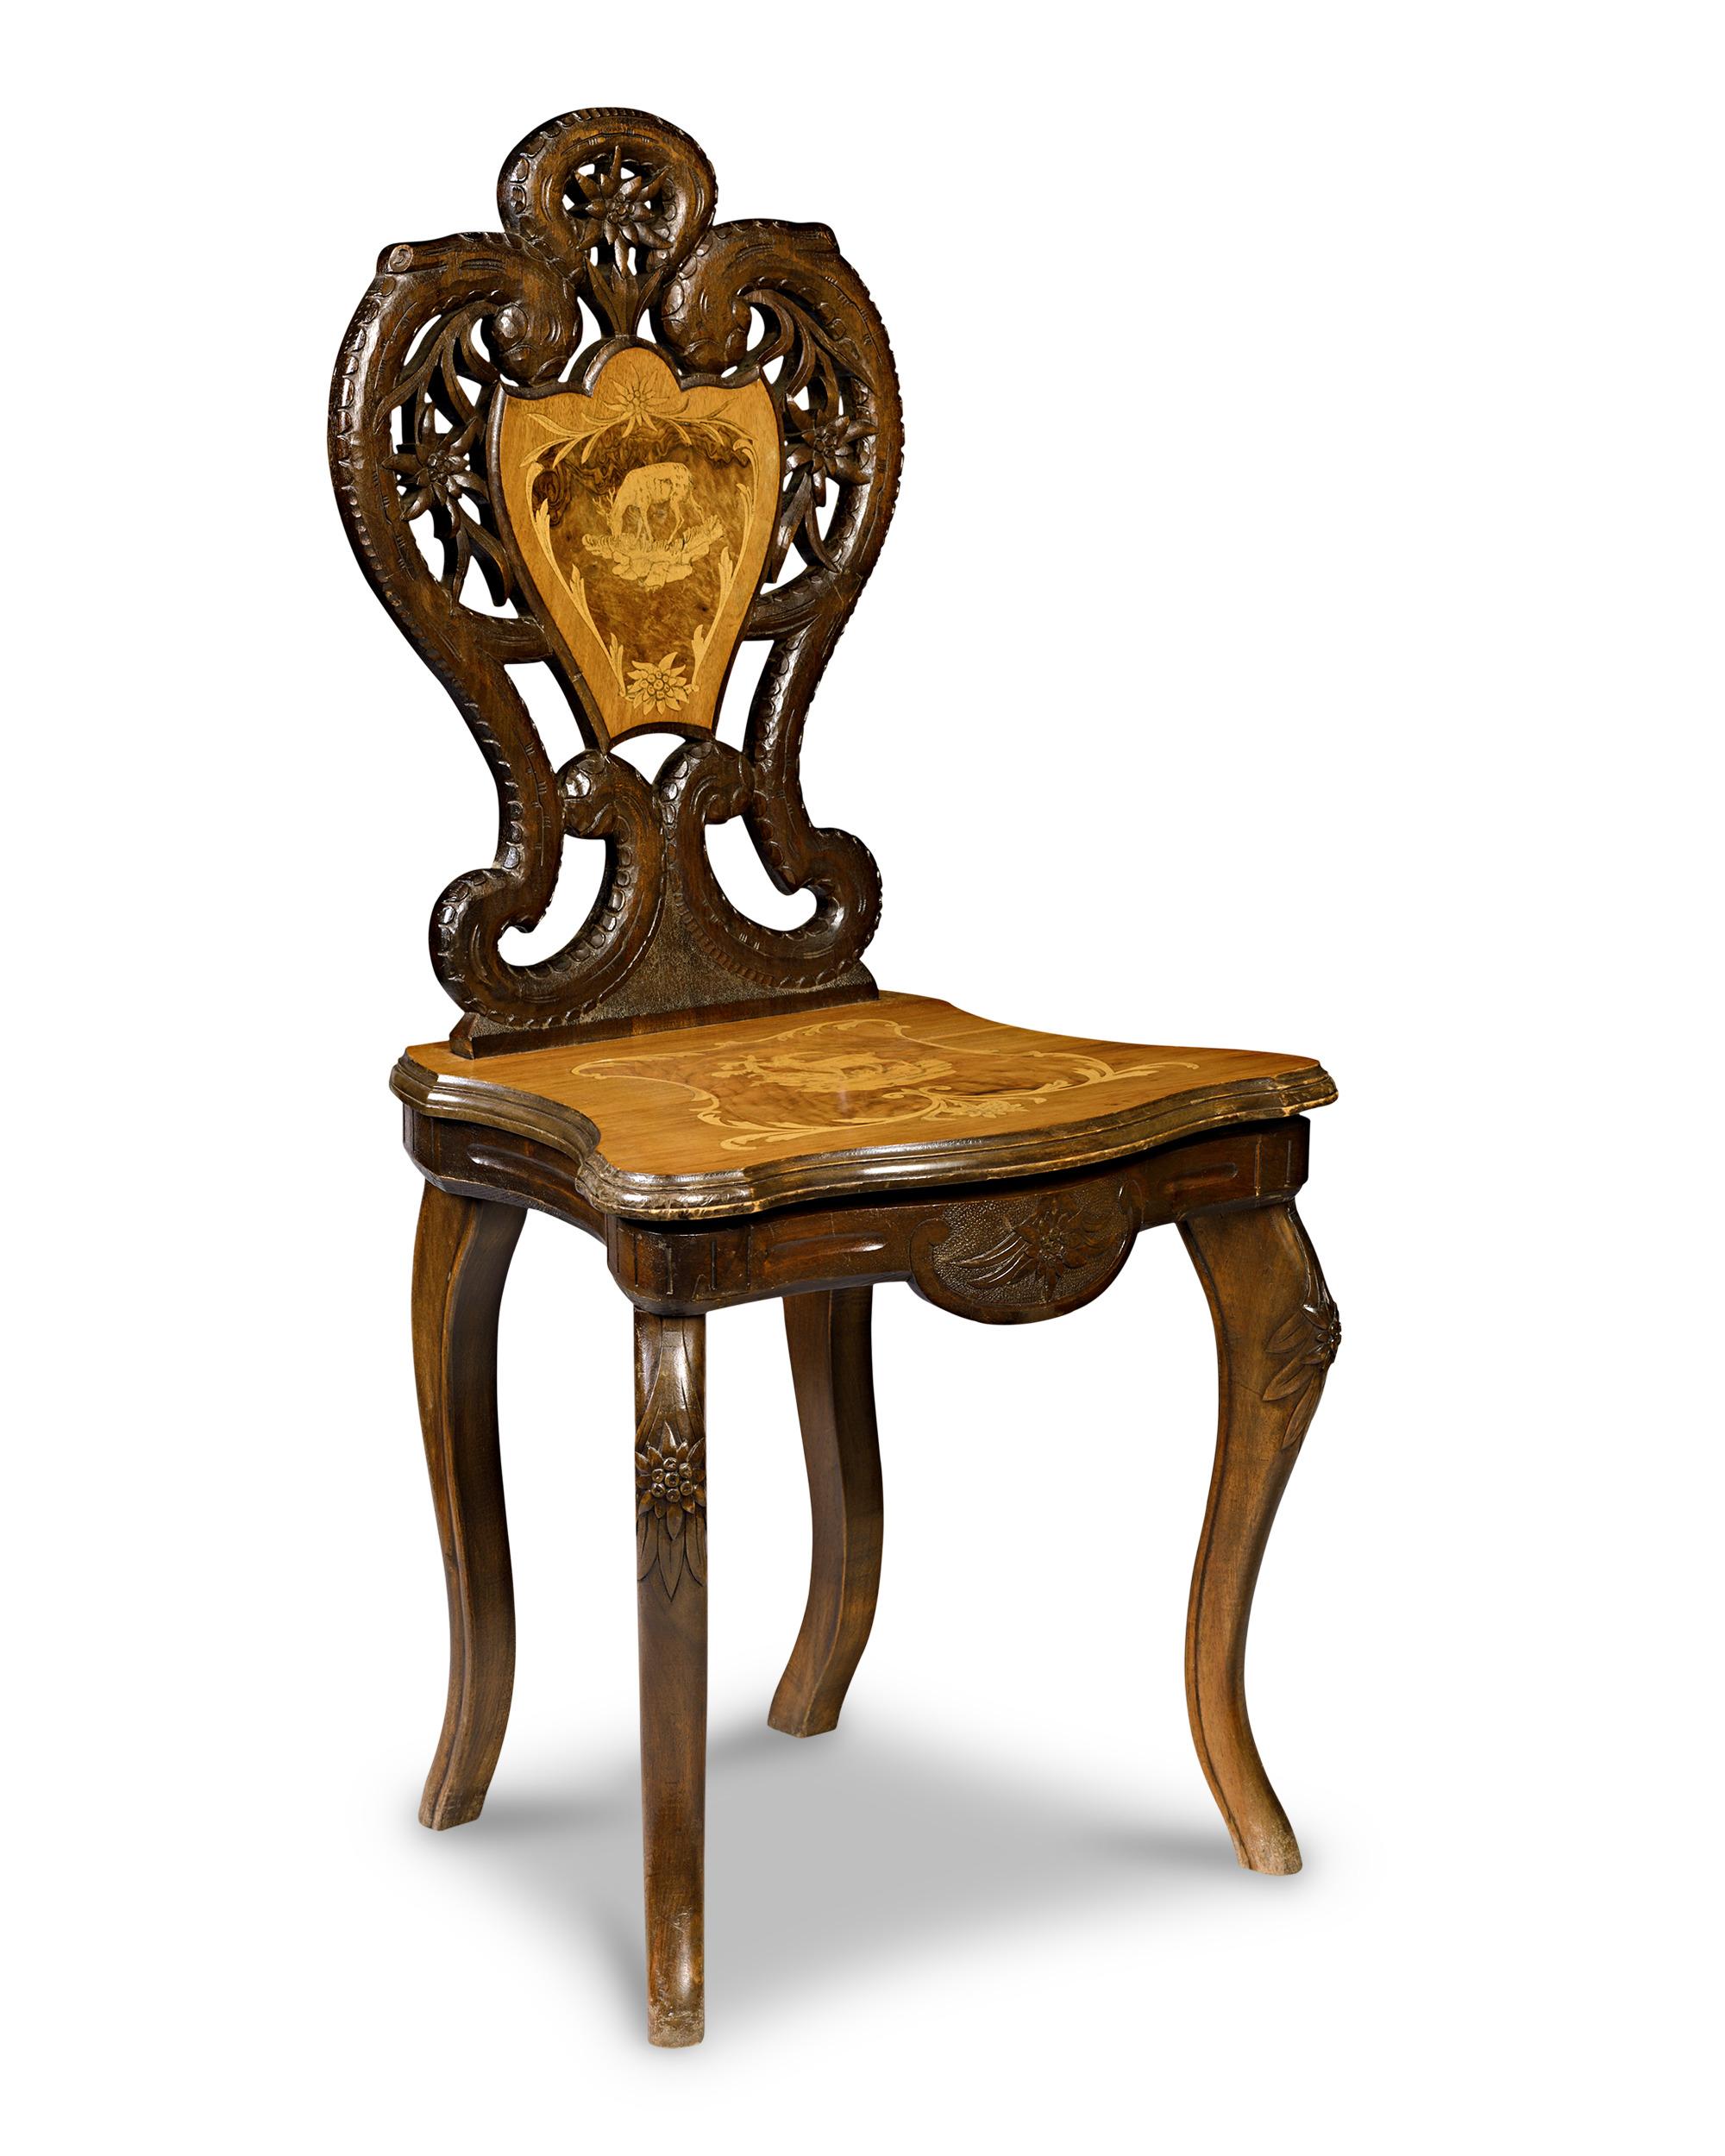 This exceptional Swiss Black Forest chair offers a delightful surprise—a music box hidden inside will activate when the chair is sat upon. A remarkable example of the intricate craftsmanship and artistic innovation characteristic of late